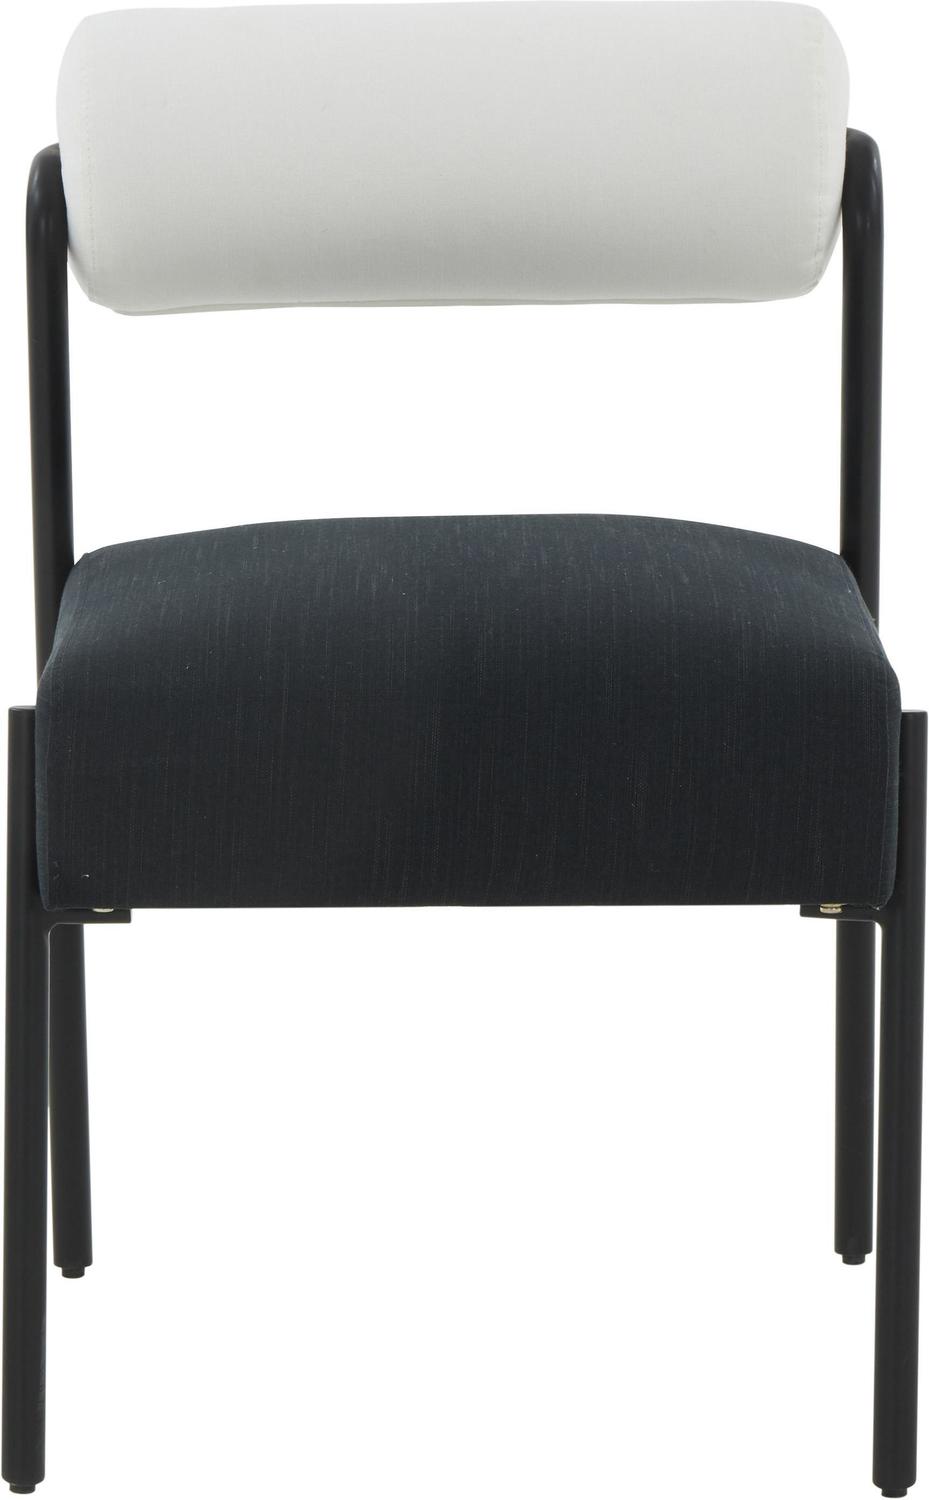 gold dining chair legs Contemporary Design Furniture Dining Chairs Black,Cream